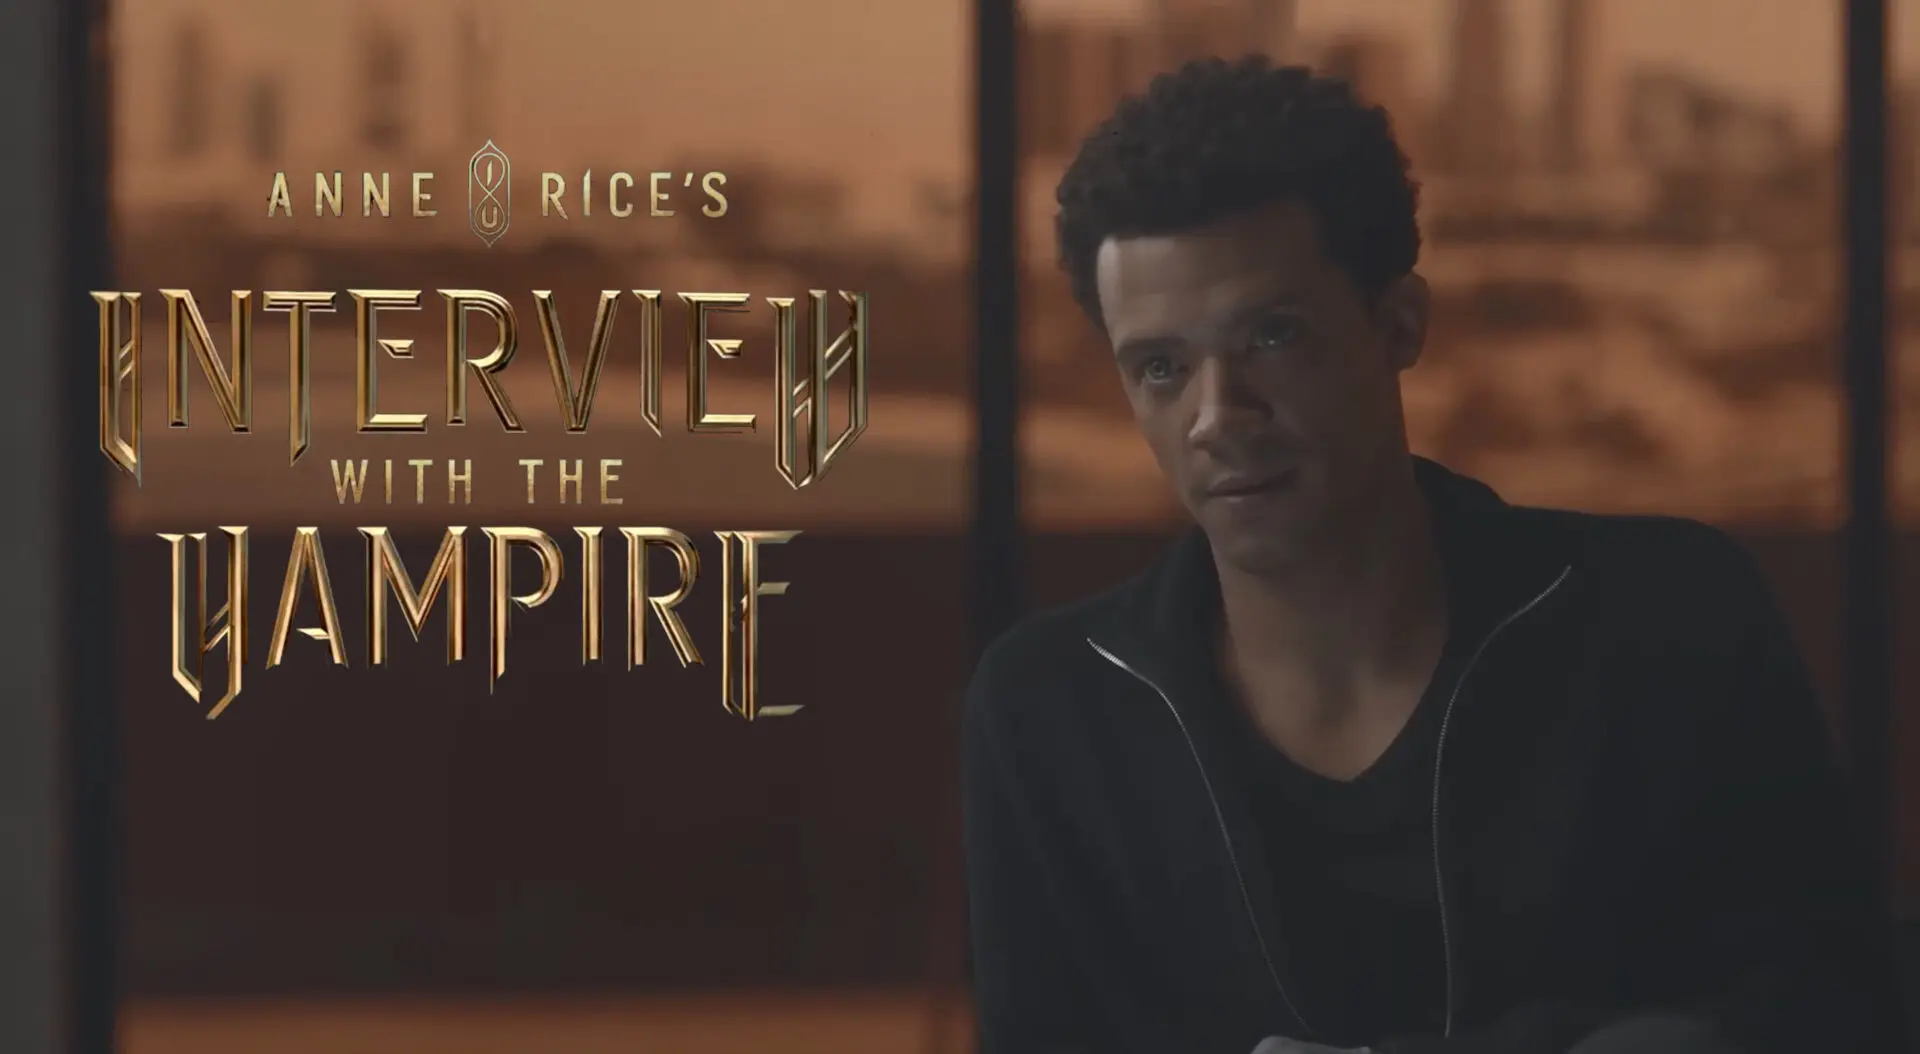 interview with a vampire amc teaser trailer banner